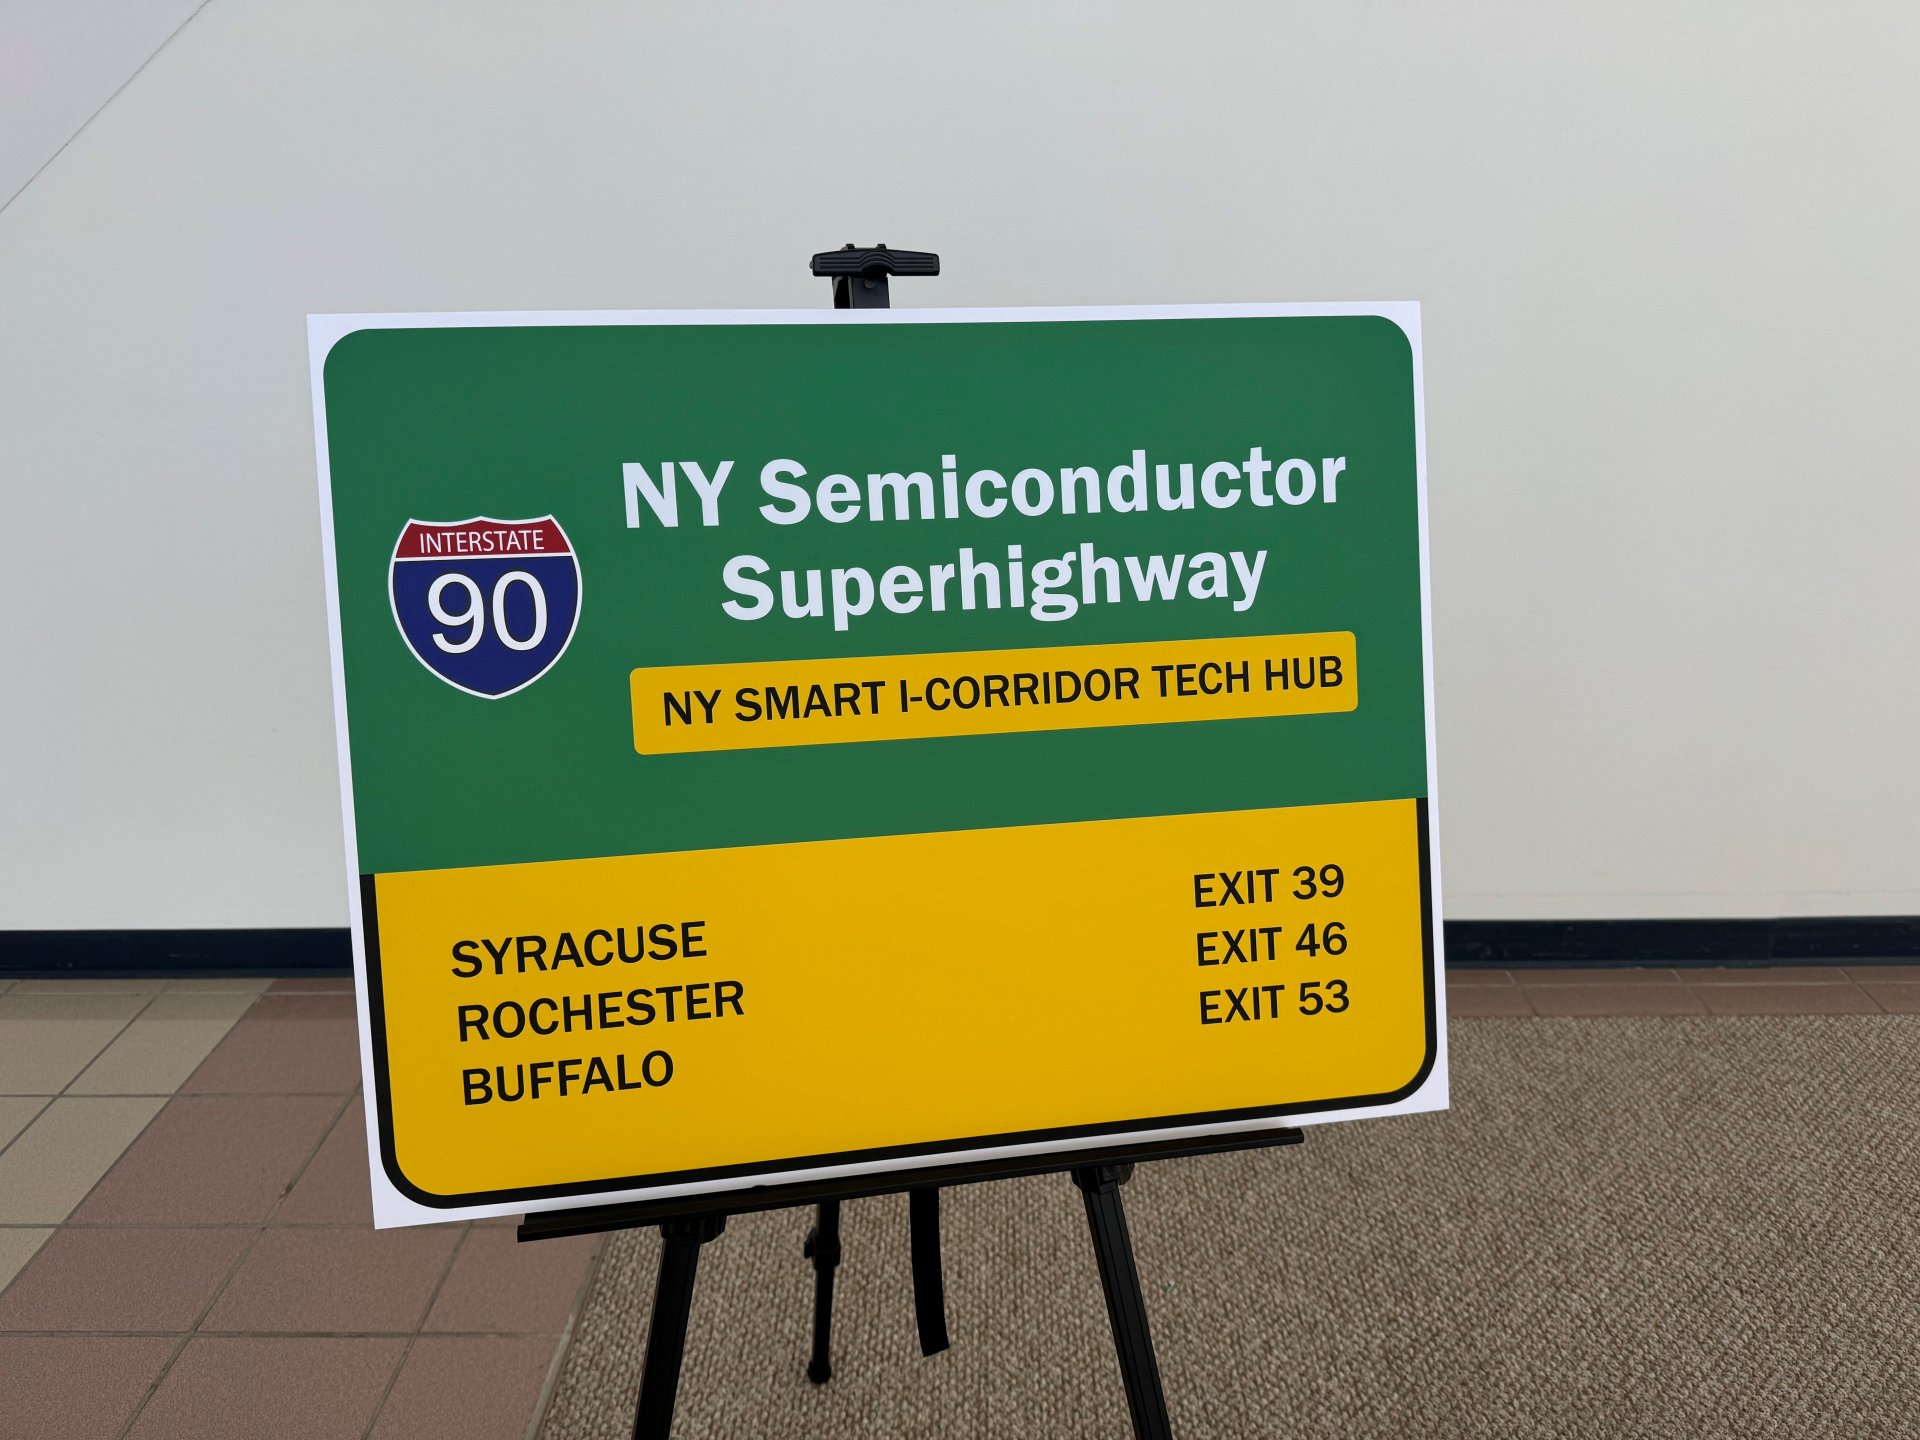 NY Semiconductor SuperHighway sign